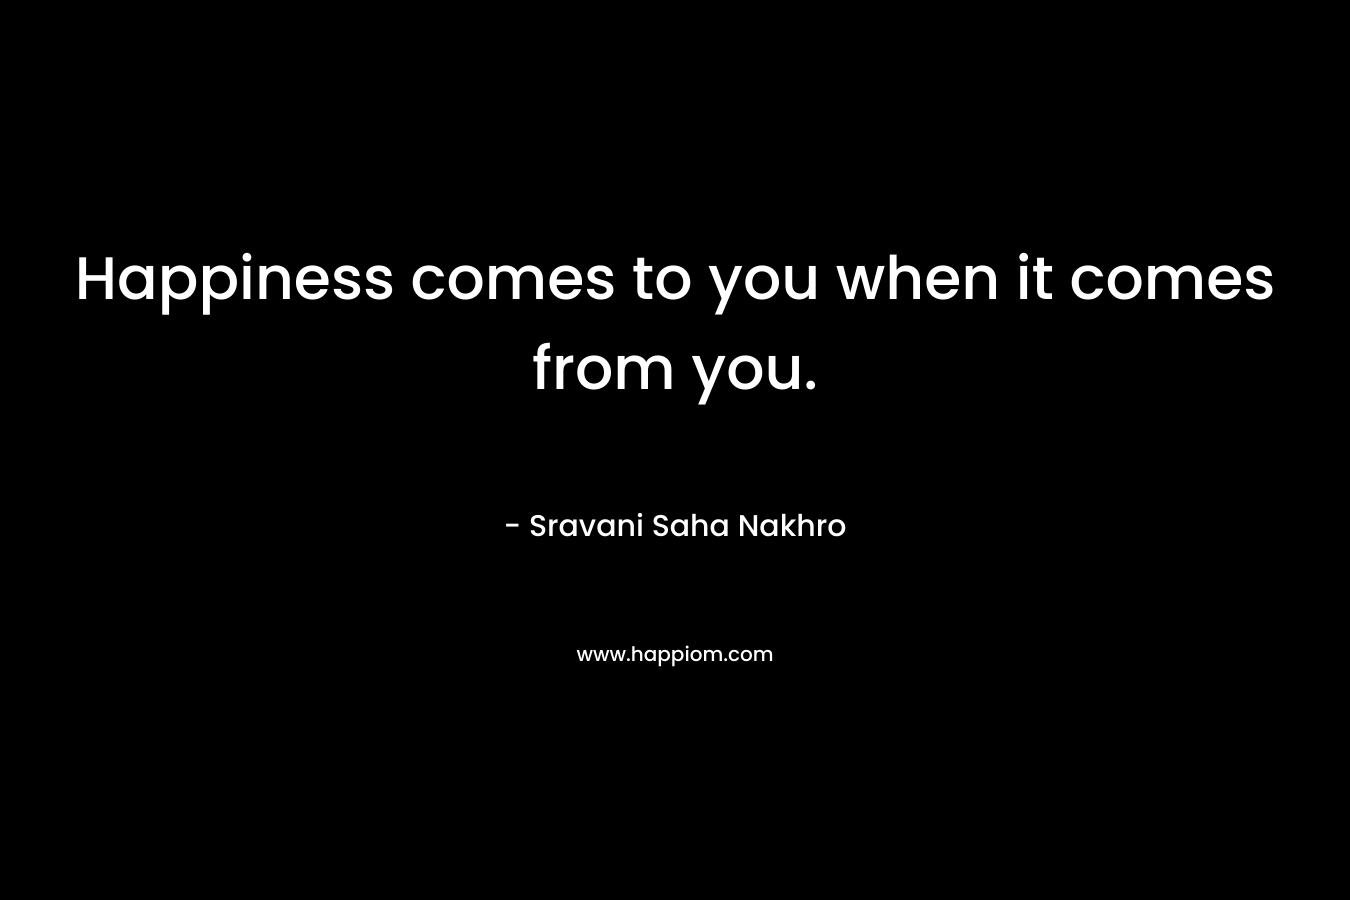 Happiness comes to you when it comes from you.